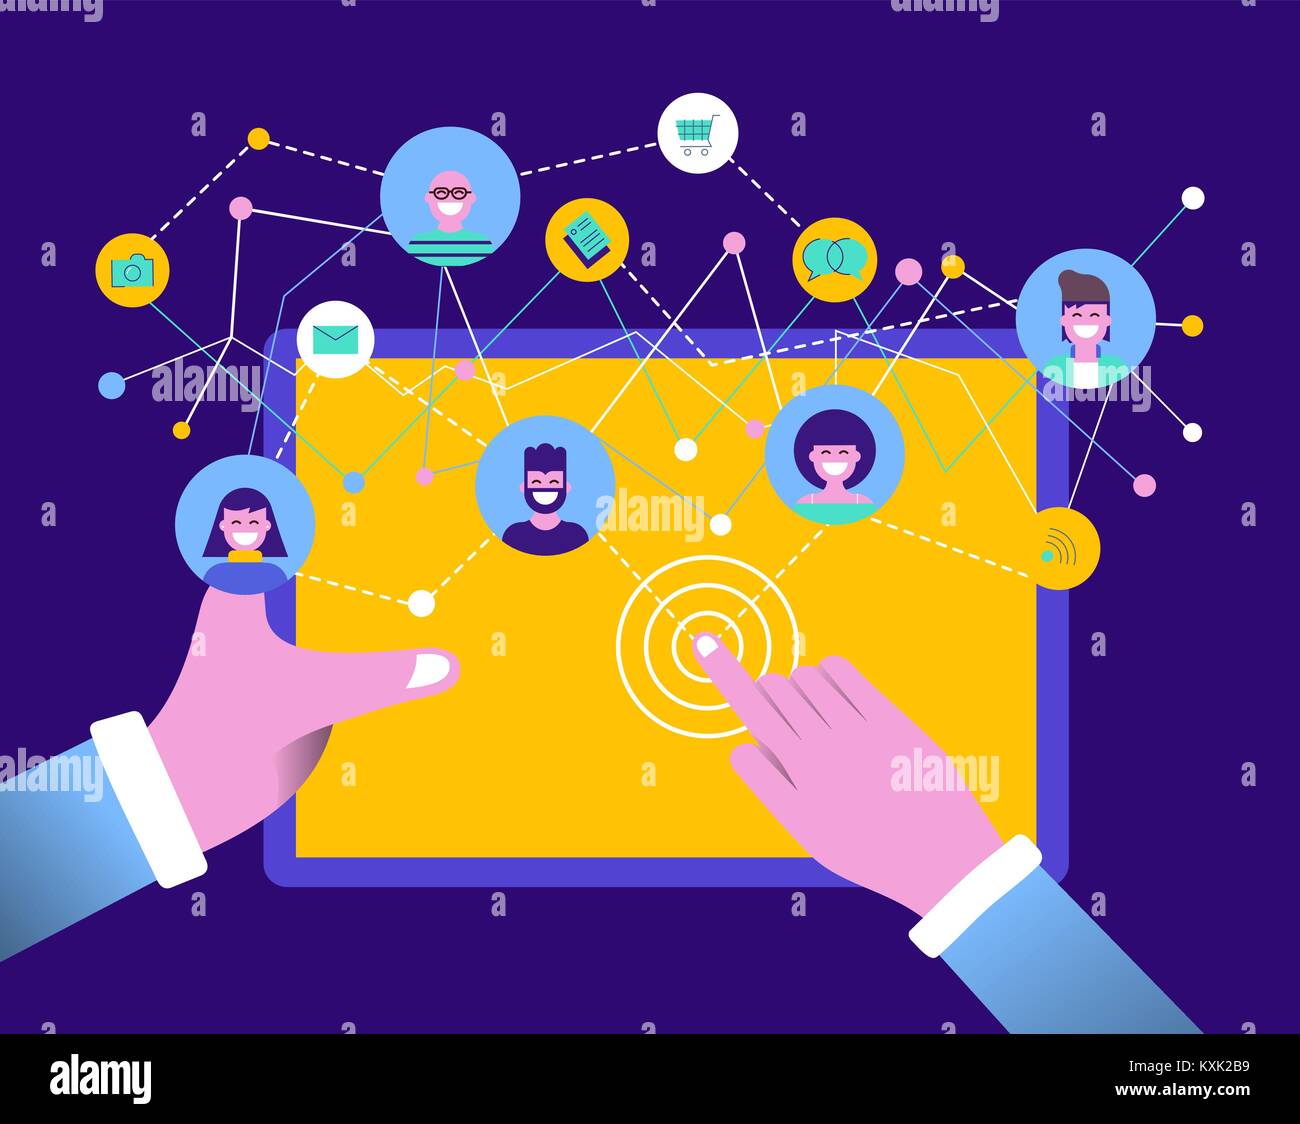 Man holding tablet connected to online social media network activities and people team. Includes shopping, photo, mail, message icon. EPS10 vector. Stock Vector